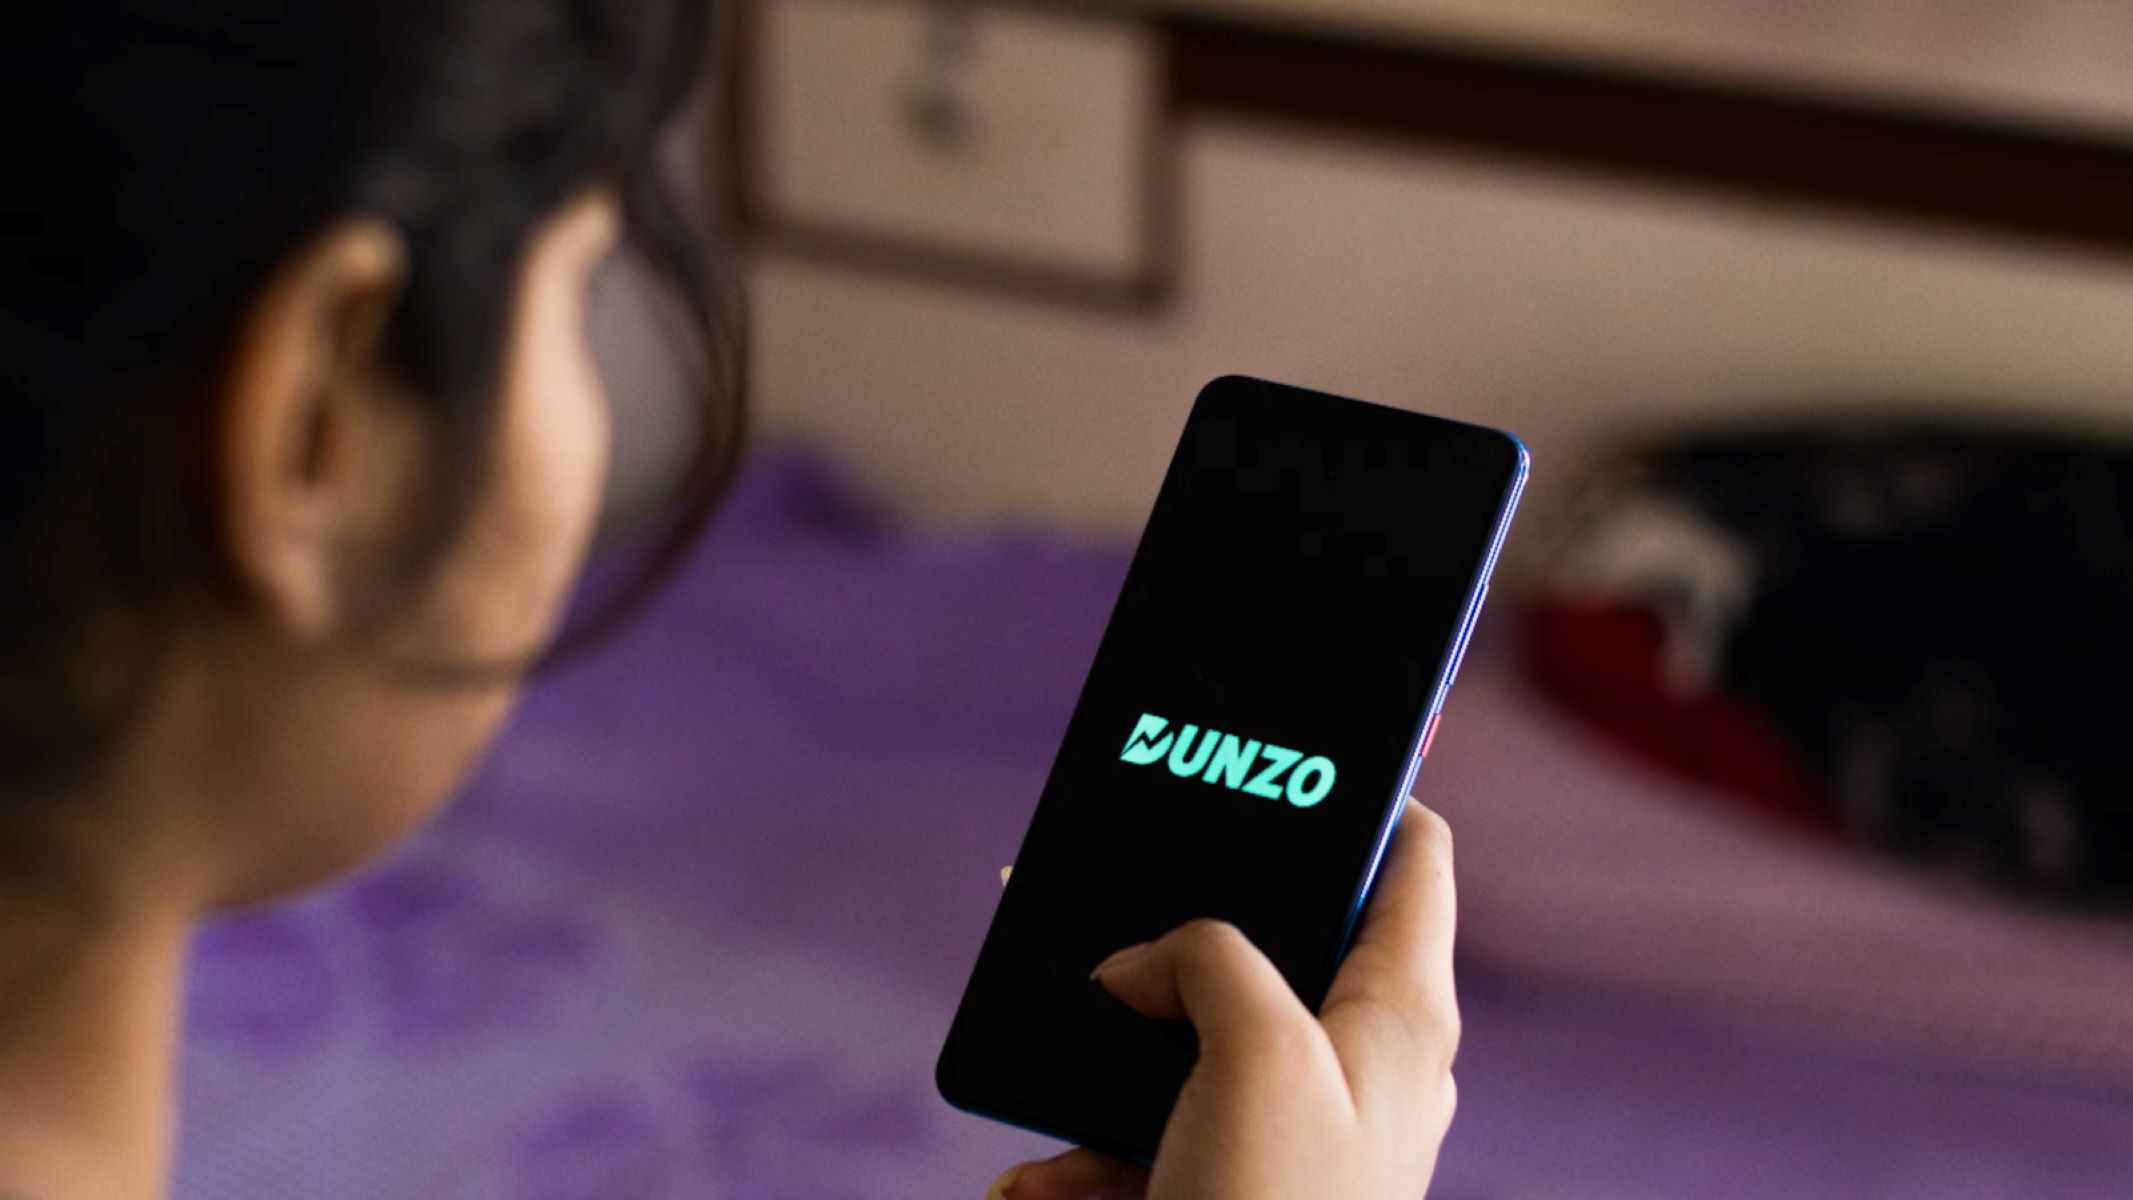 Dunzo, Backed By Reliance And Google, Faces Salary Delays Again: Troubles Mount For Hyperlocal Delivery Startup